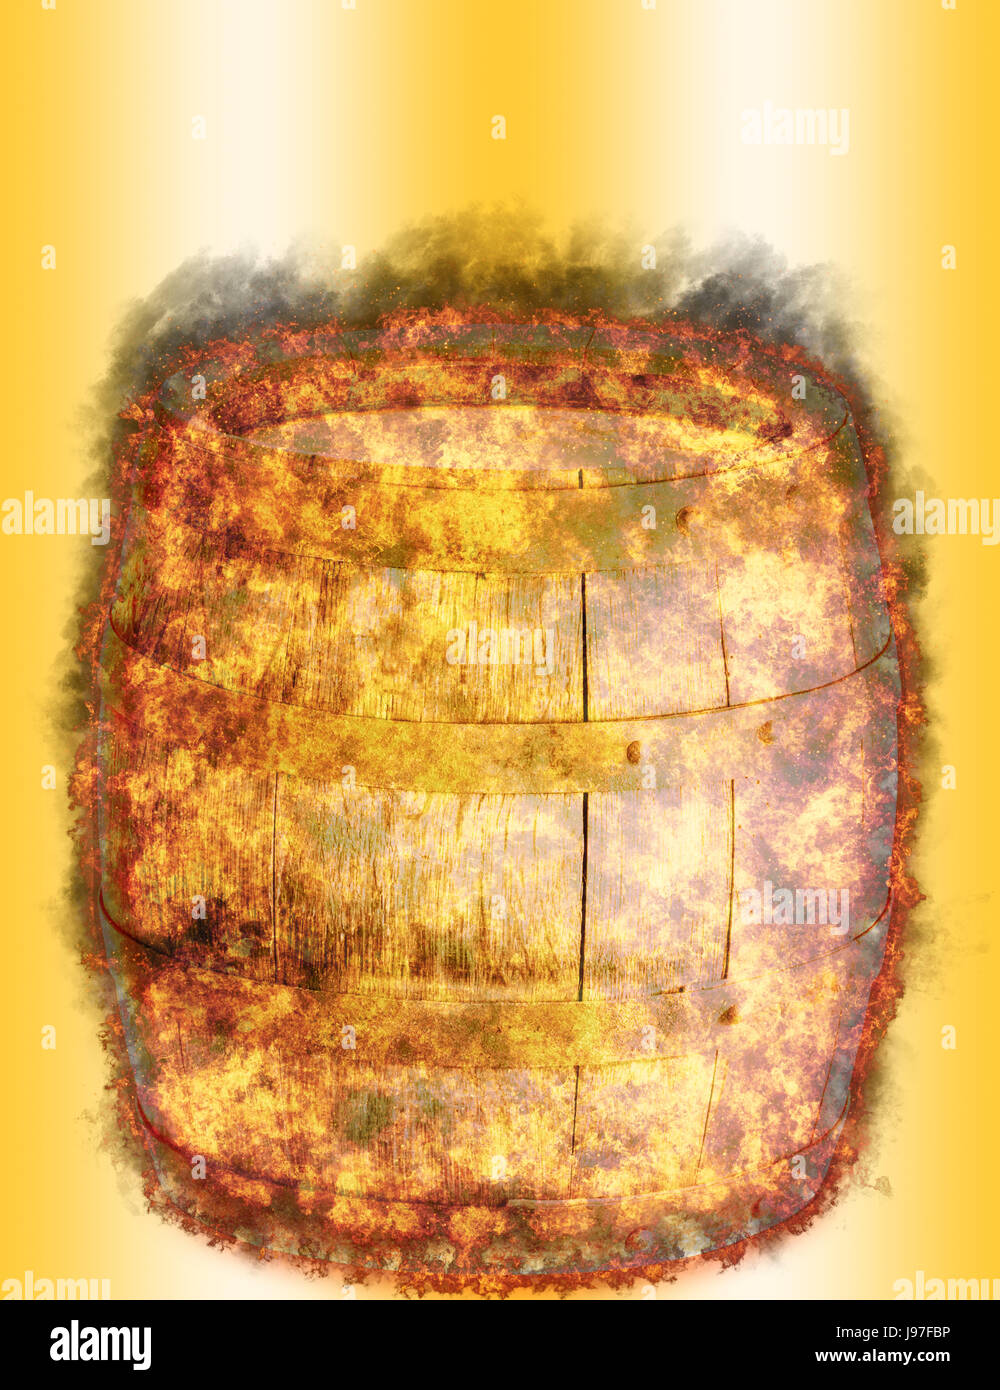 Burning wood barrel, bursted into flames, isolated against the golden background Stock Photo